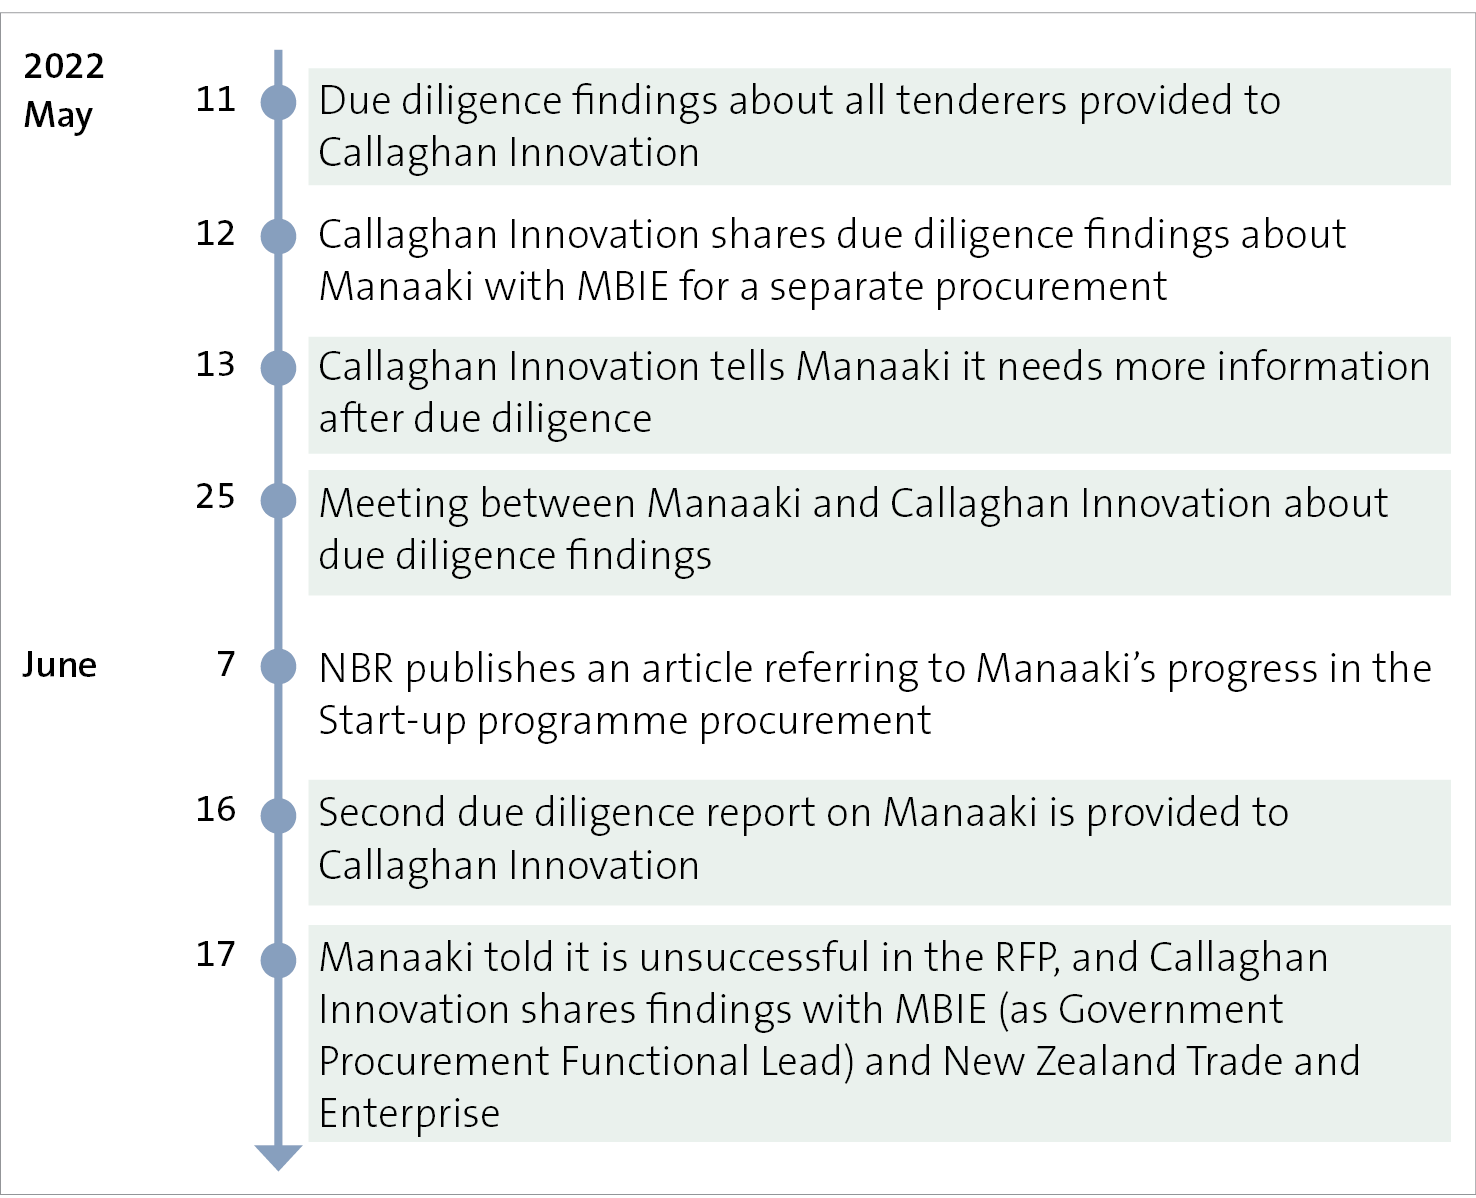 Figure 3: Stages of the due diligence process, from May 2022 to June 2022